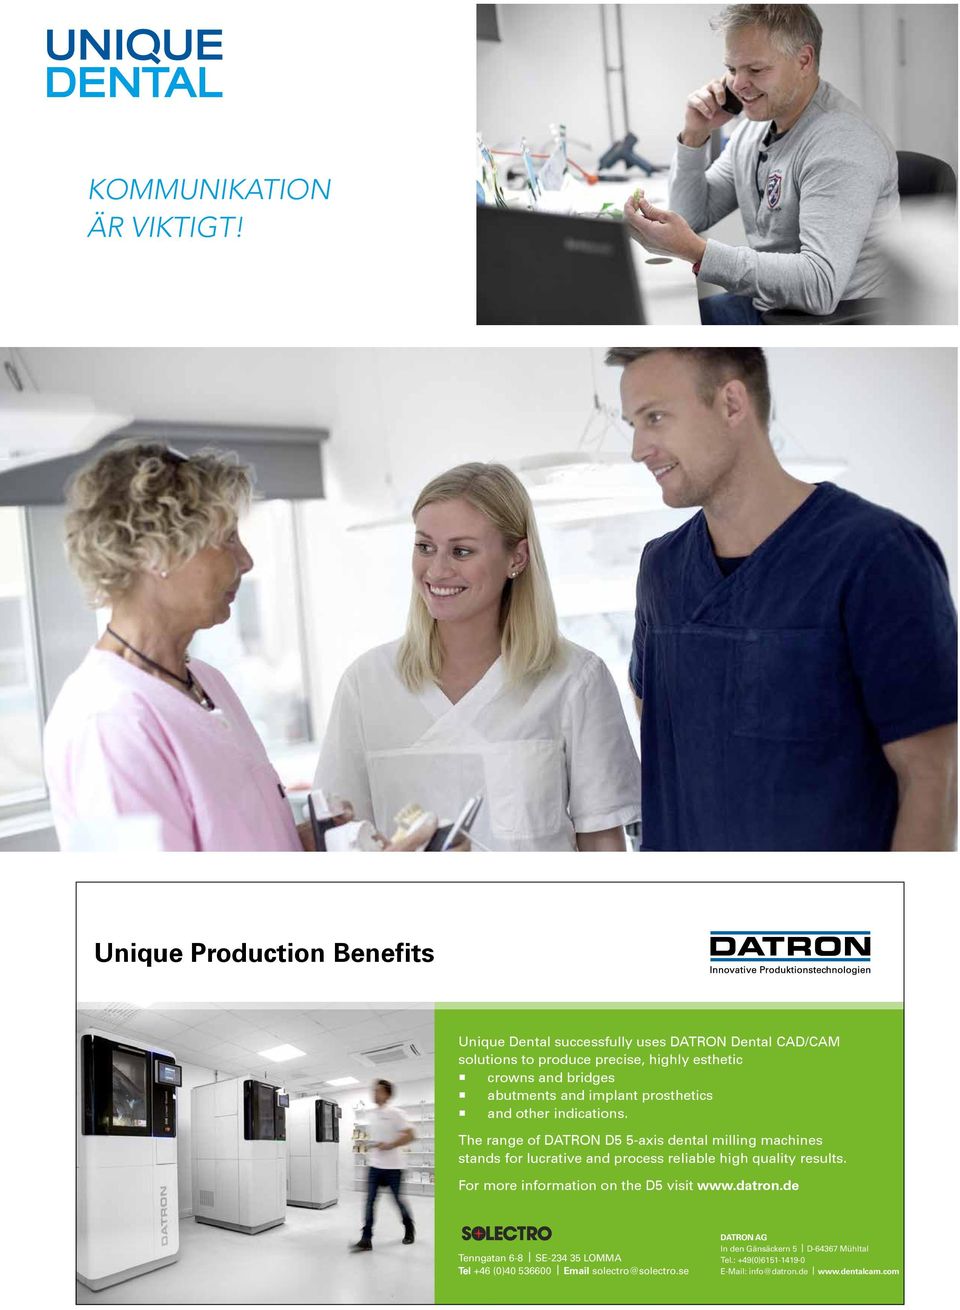 implant prosthetics and other indications. The range of DATRON D5 5-axis dental milling machines stands for lucrative and process reliable high quality results.